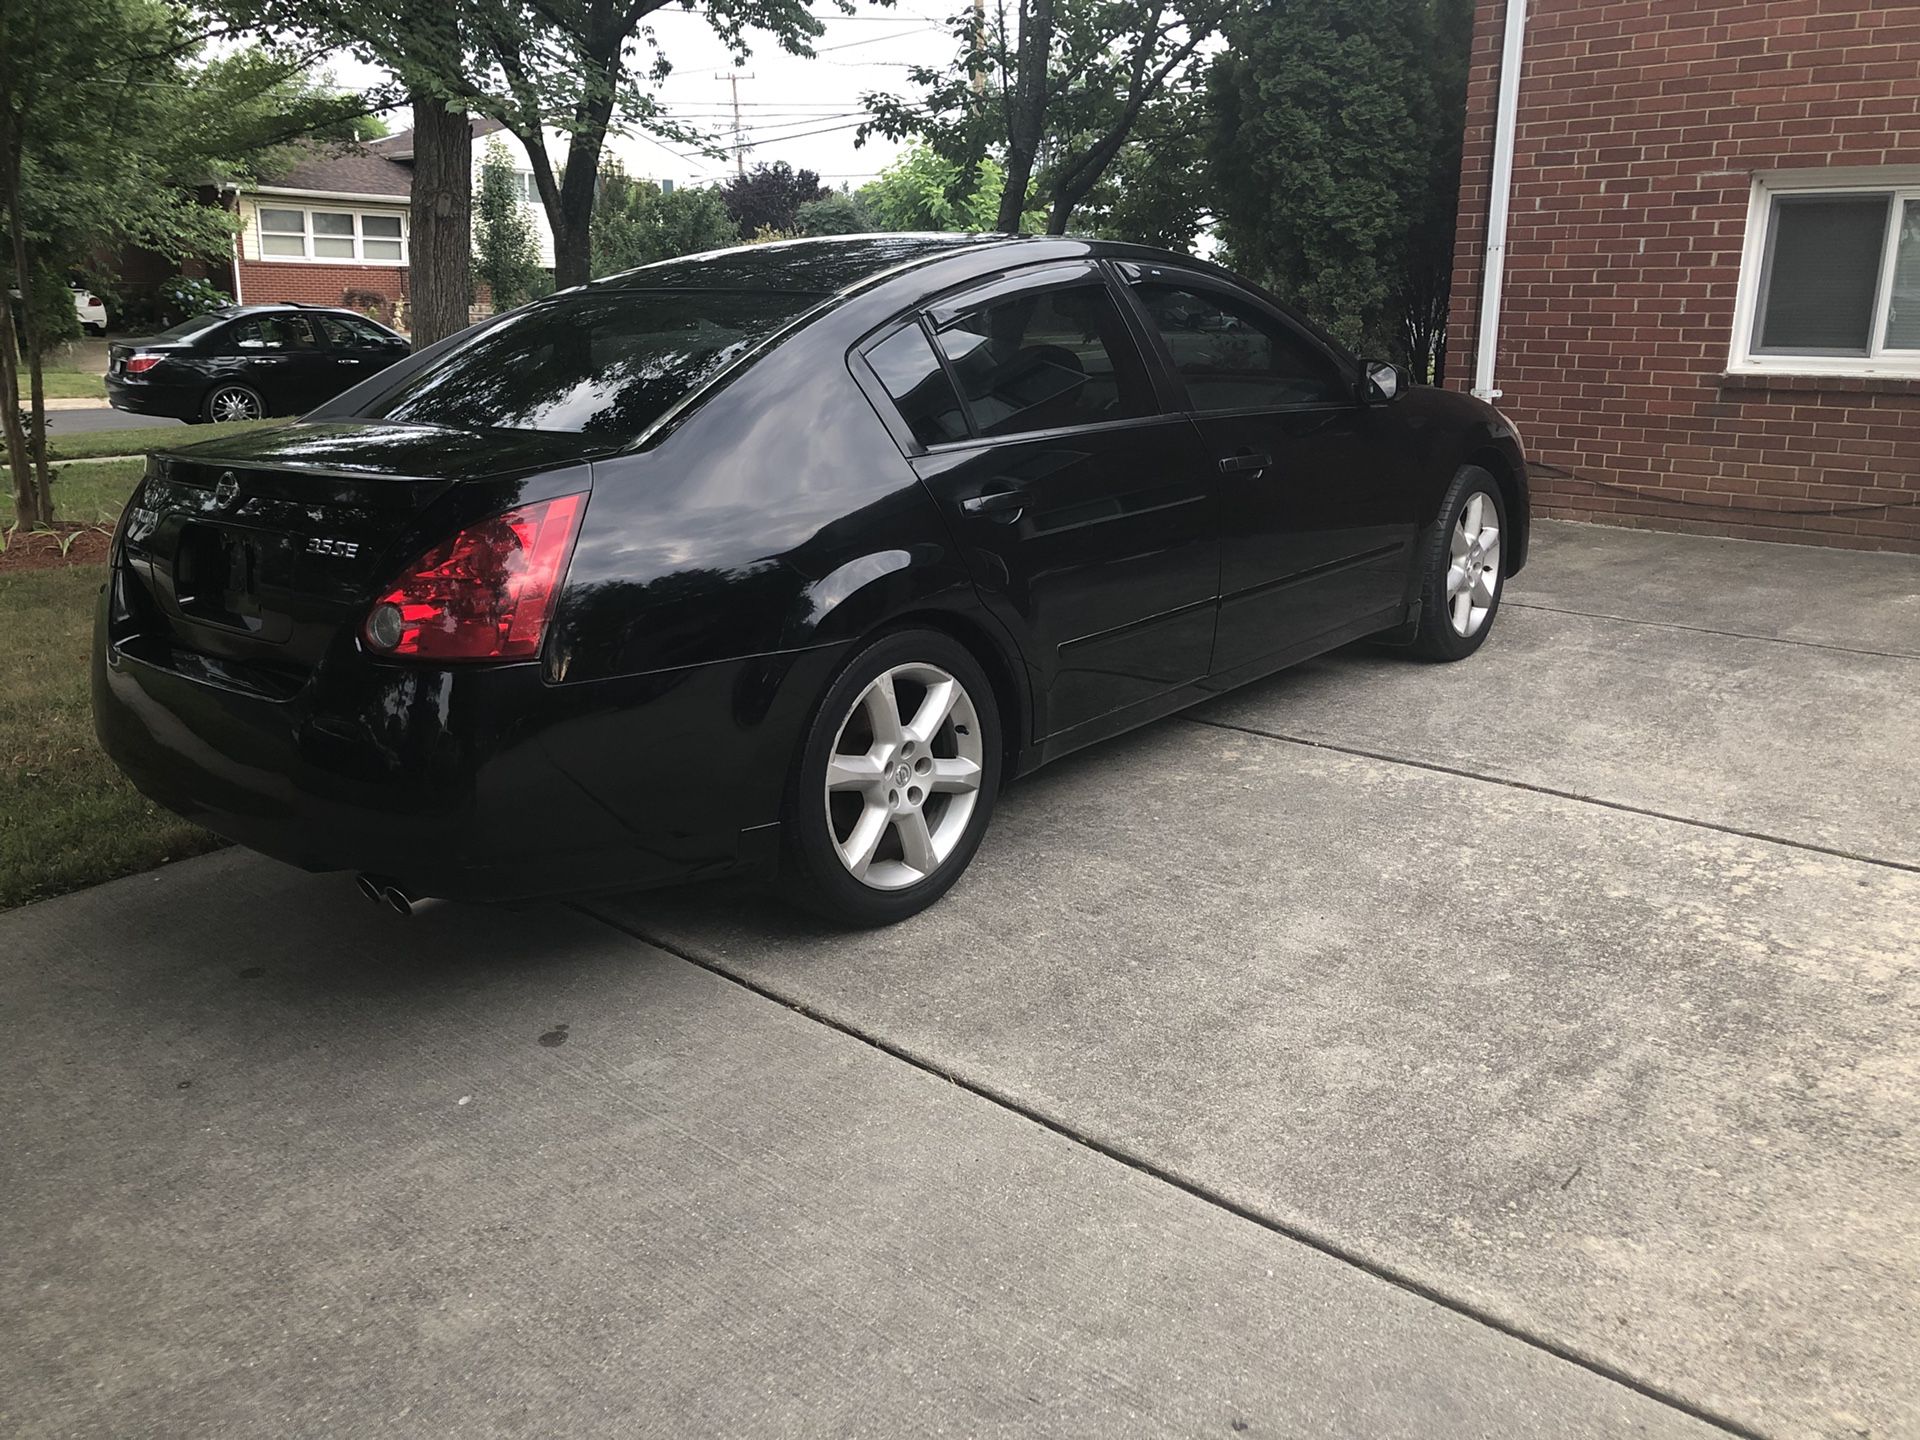 2004 Nissan Maxima SL....runs fine...leather seats, clean title, great condition. Needs windshield replacement (cracked)